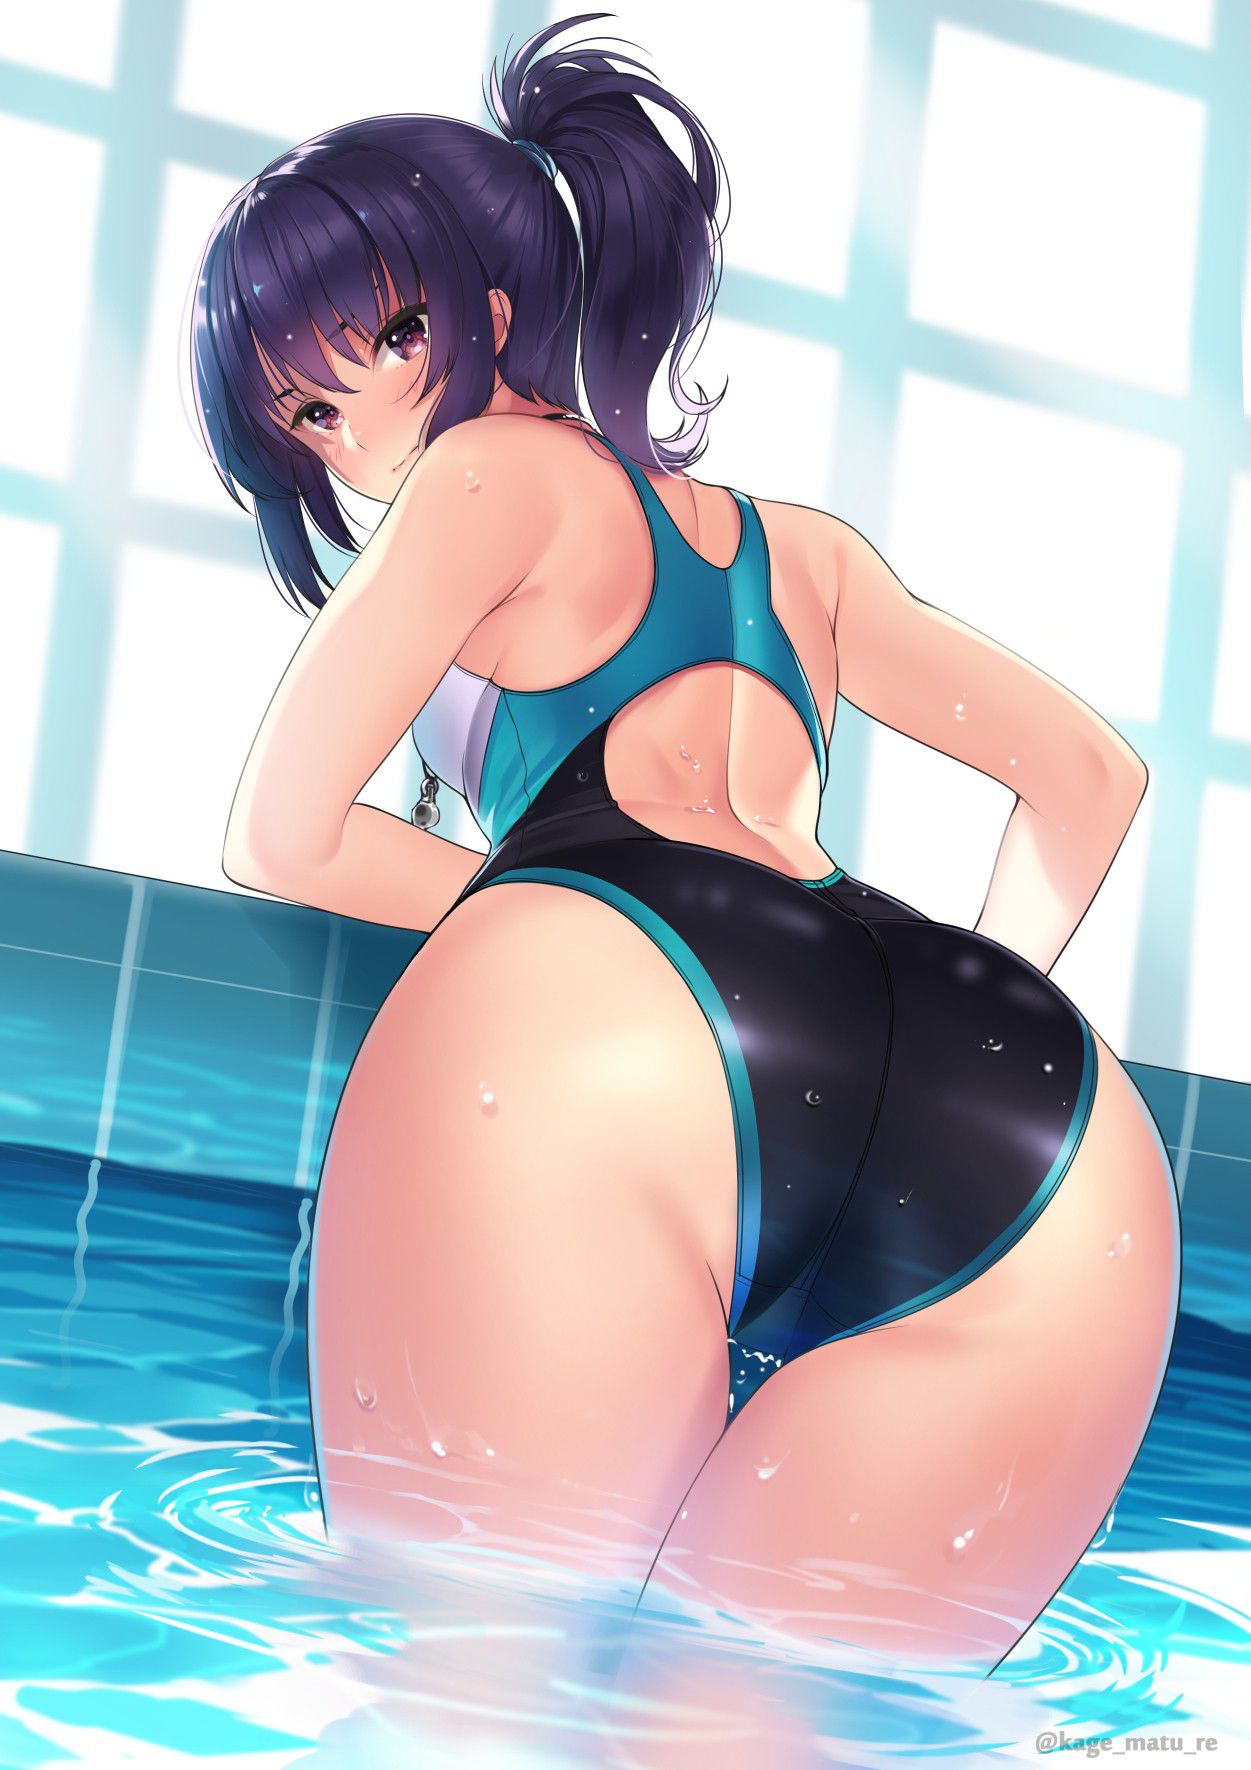 [2nd] Second erotic image of a girl wearing a swimming swimsuit 5 [competition swimsuit] 4